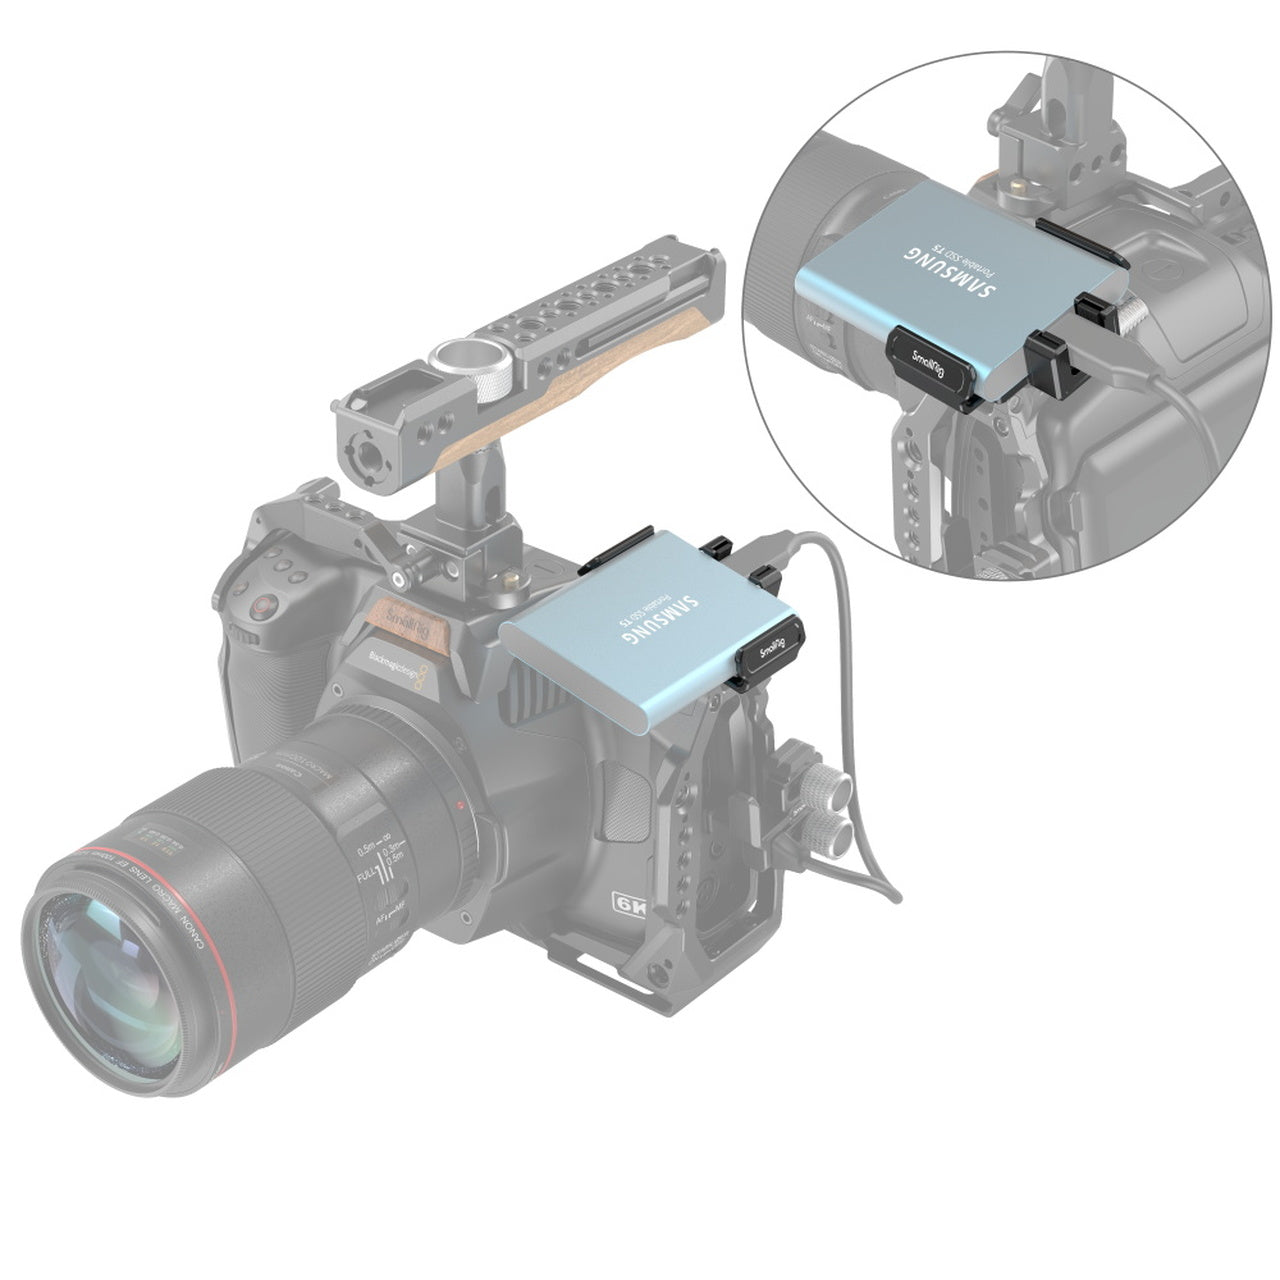 SmallRig T5/T7 SSD Mount for BMPCC 6K PRO Cage Bracket Holder with Spring Loaded Clamp 3272